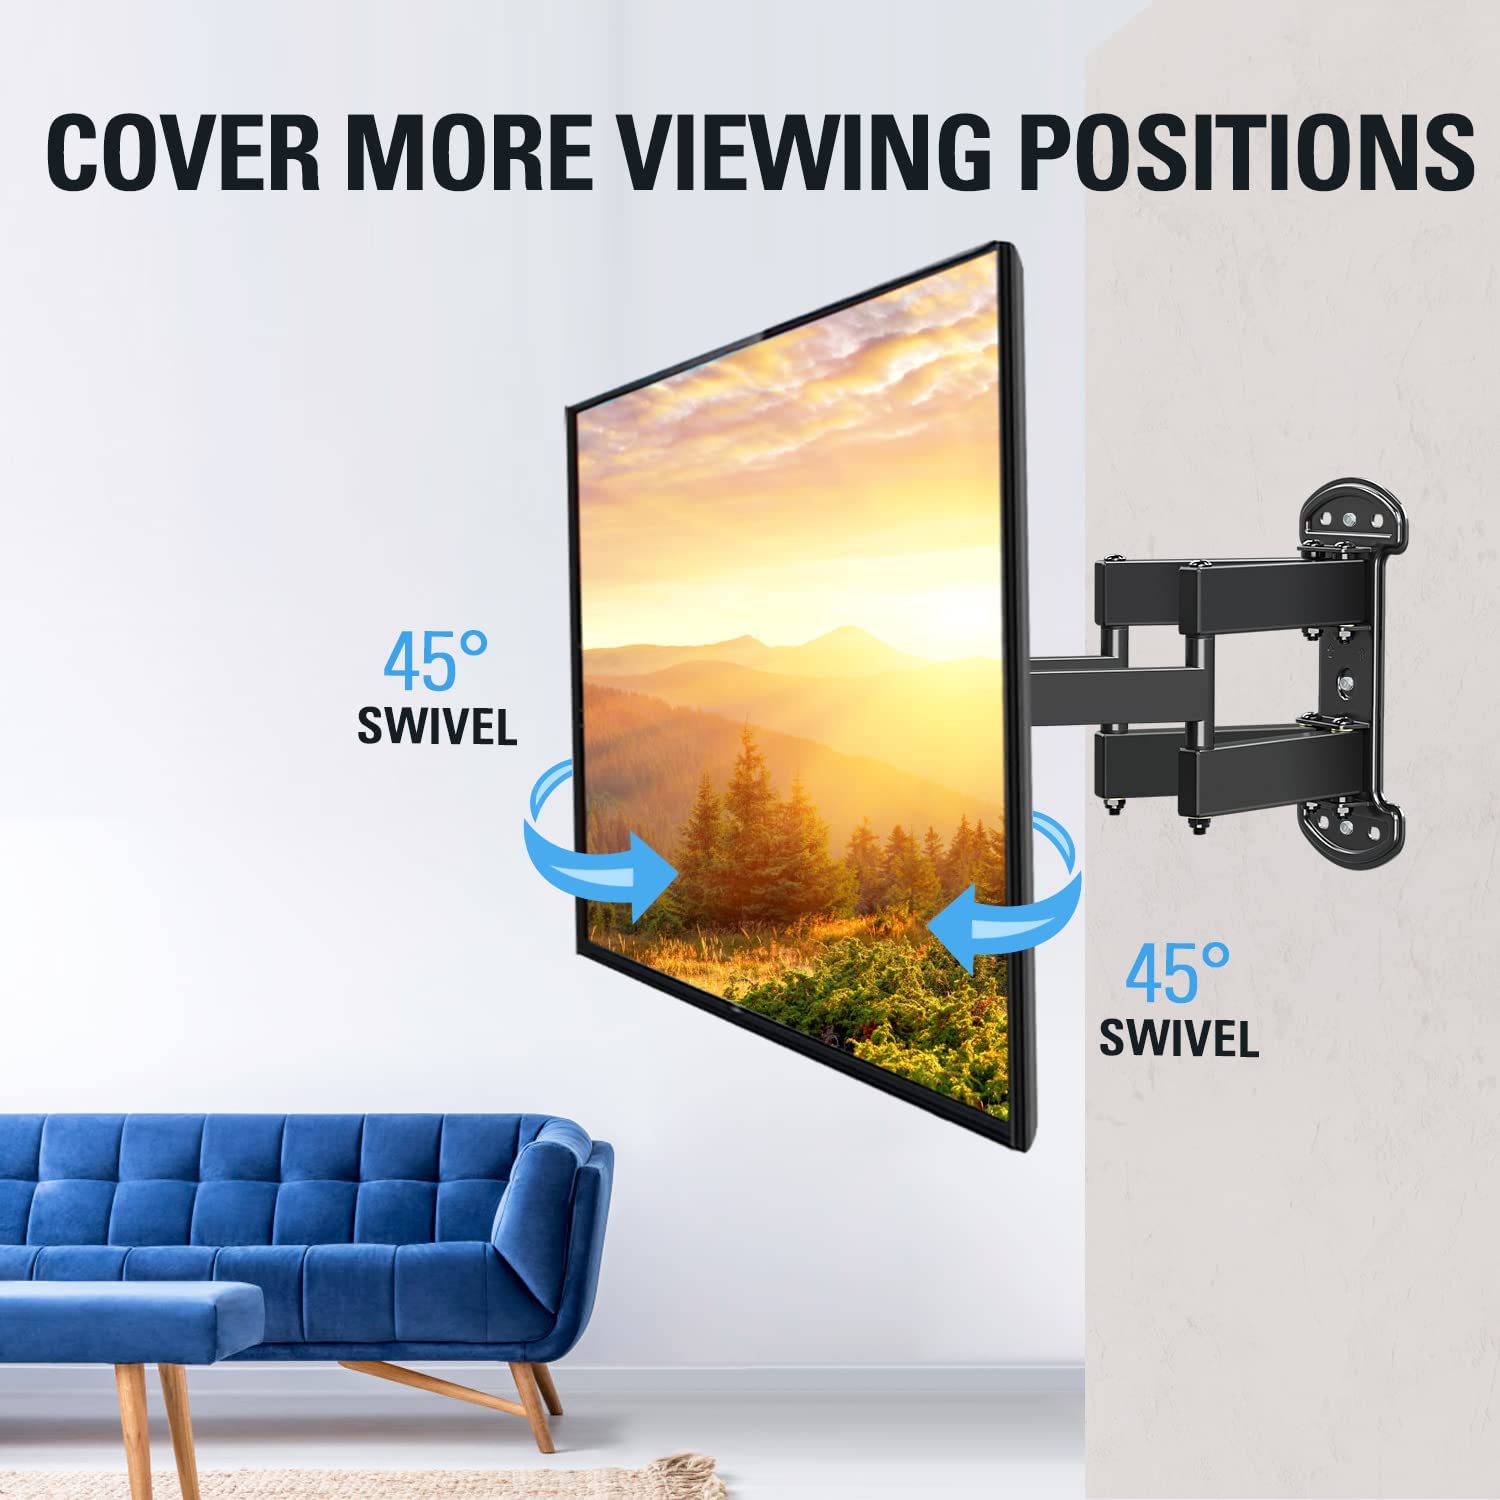 45 degree swivel tv wall mount for flexible viewing